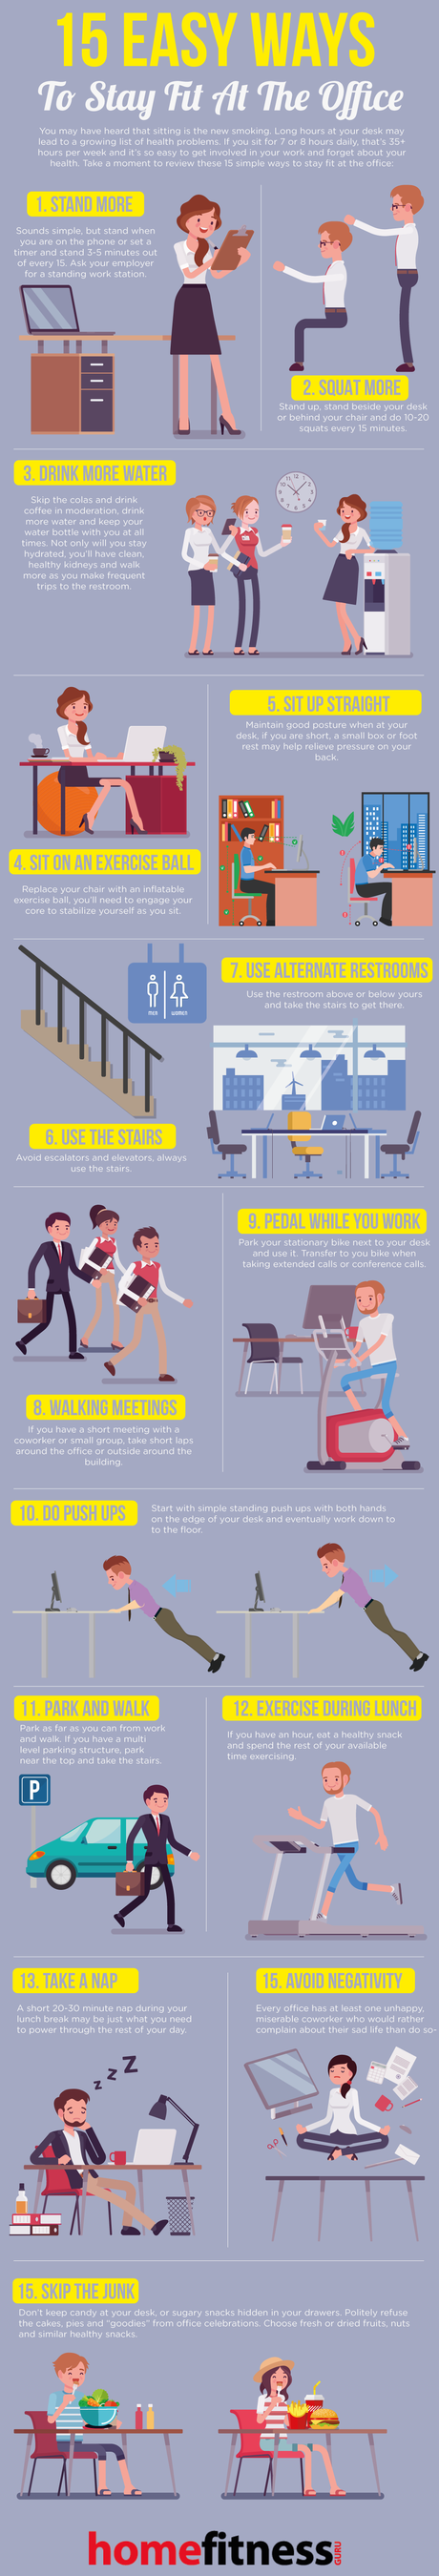 Easy Ways to Stay Fit at the Office